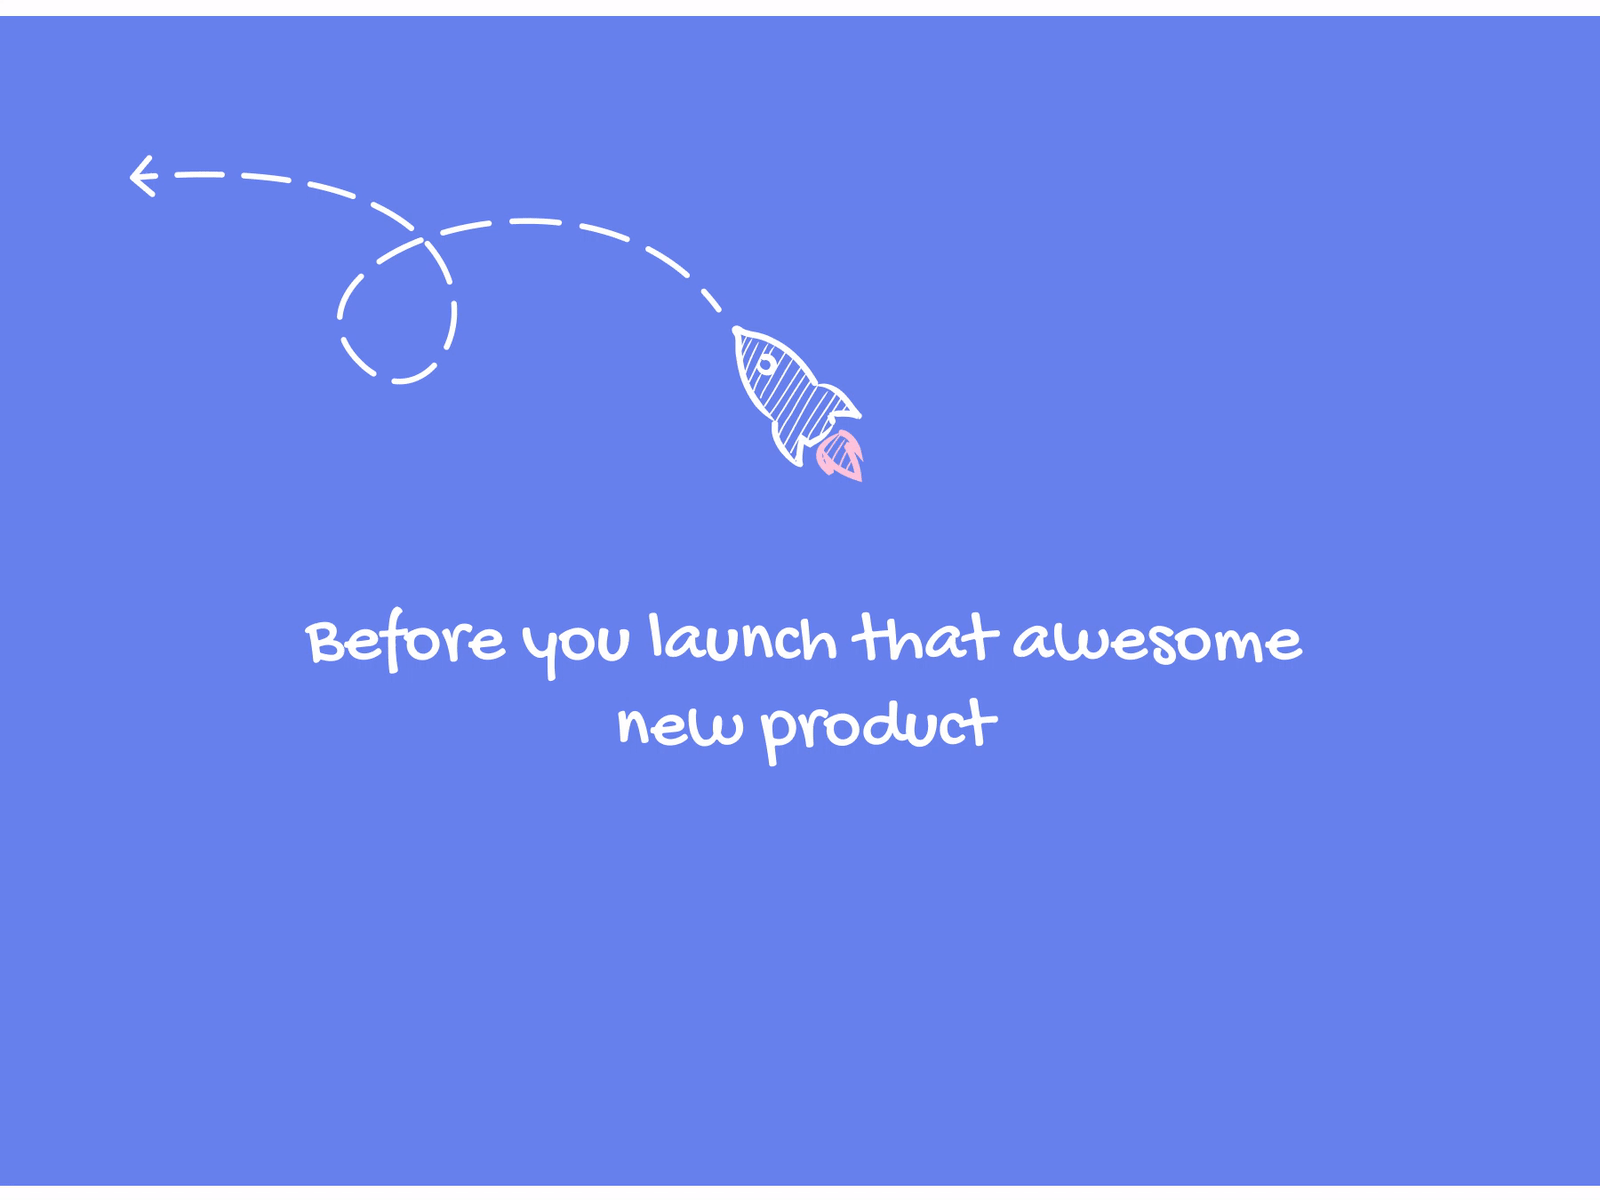 Before you launch that awesome new product ideation product design product development visual design visualization